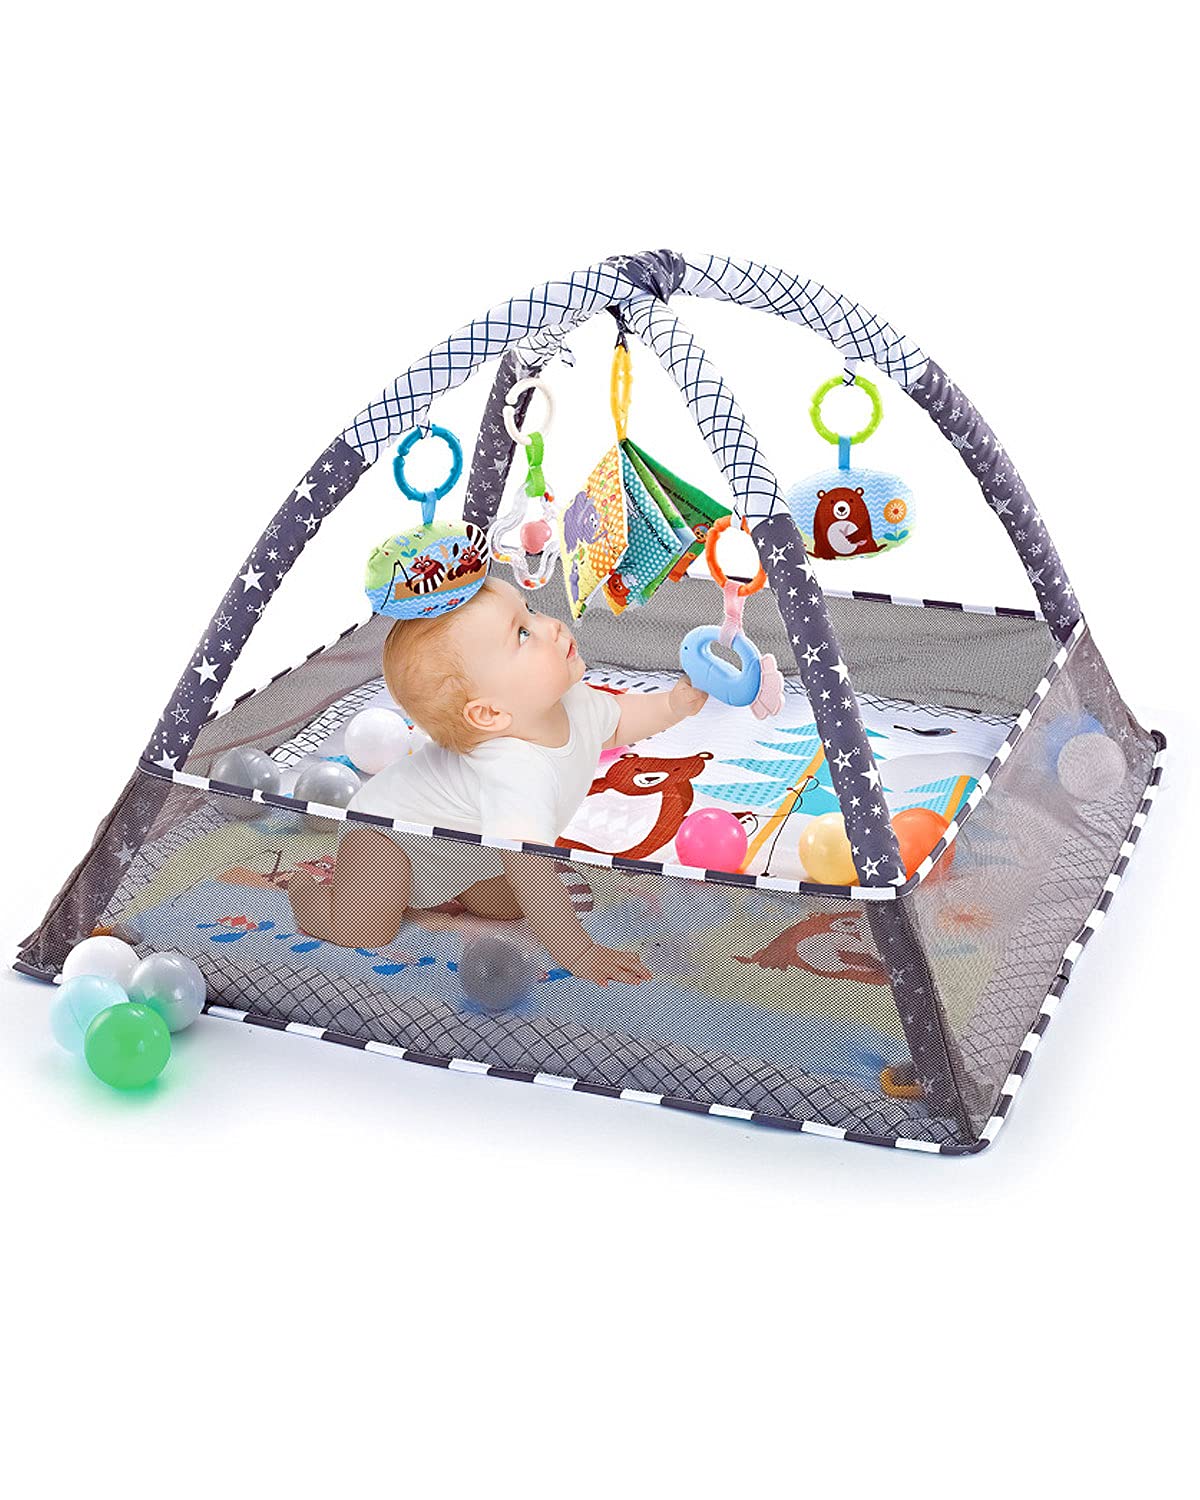 Trongle Baby Play Gym, Baby Play Mat Newborn with 5 Hanging Toys and 18 Ocean Balls, Lightweight Foam Stand Washable Soft Cotton Base, Playmats & Floor Gyms for 0-24months, with Carry Bag (80x80x55cm)